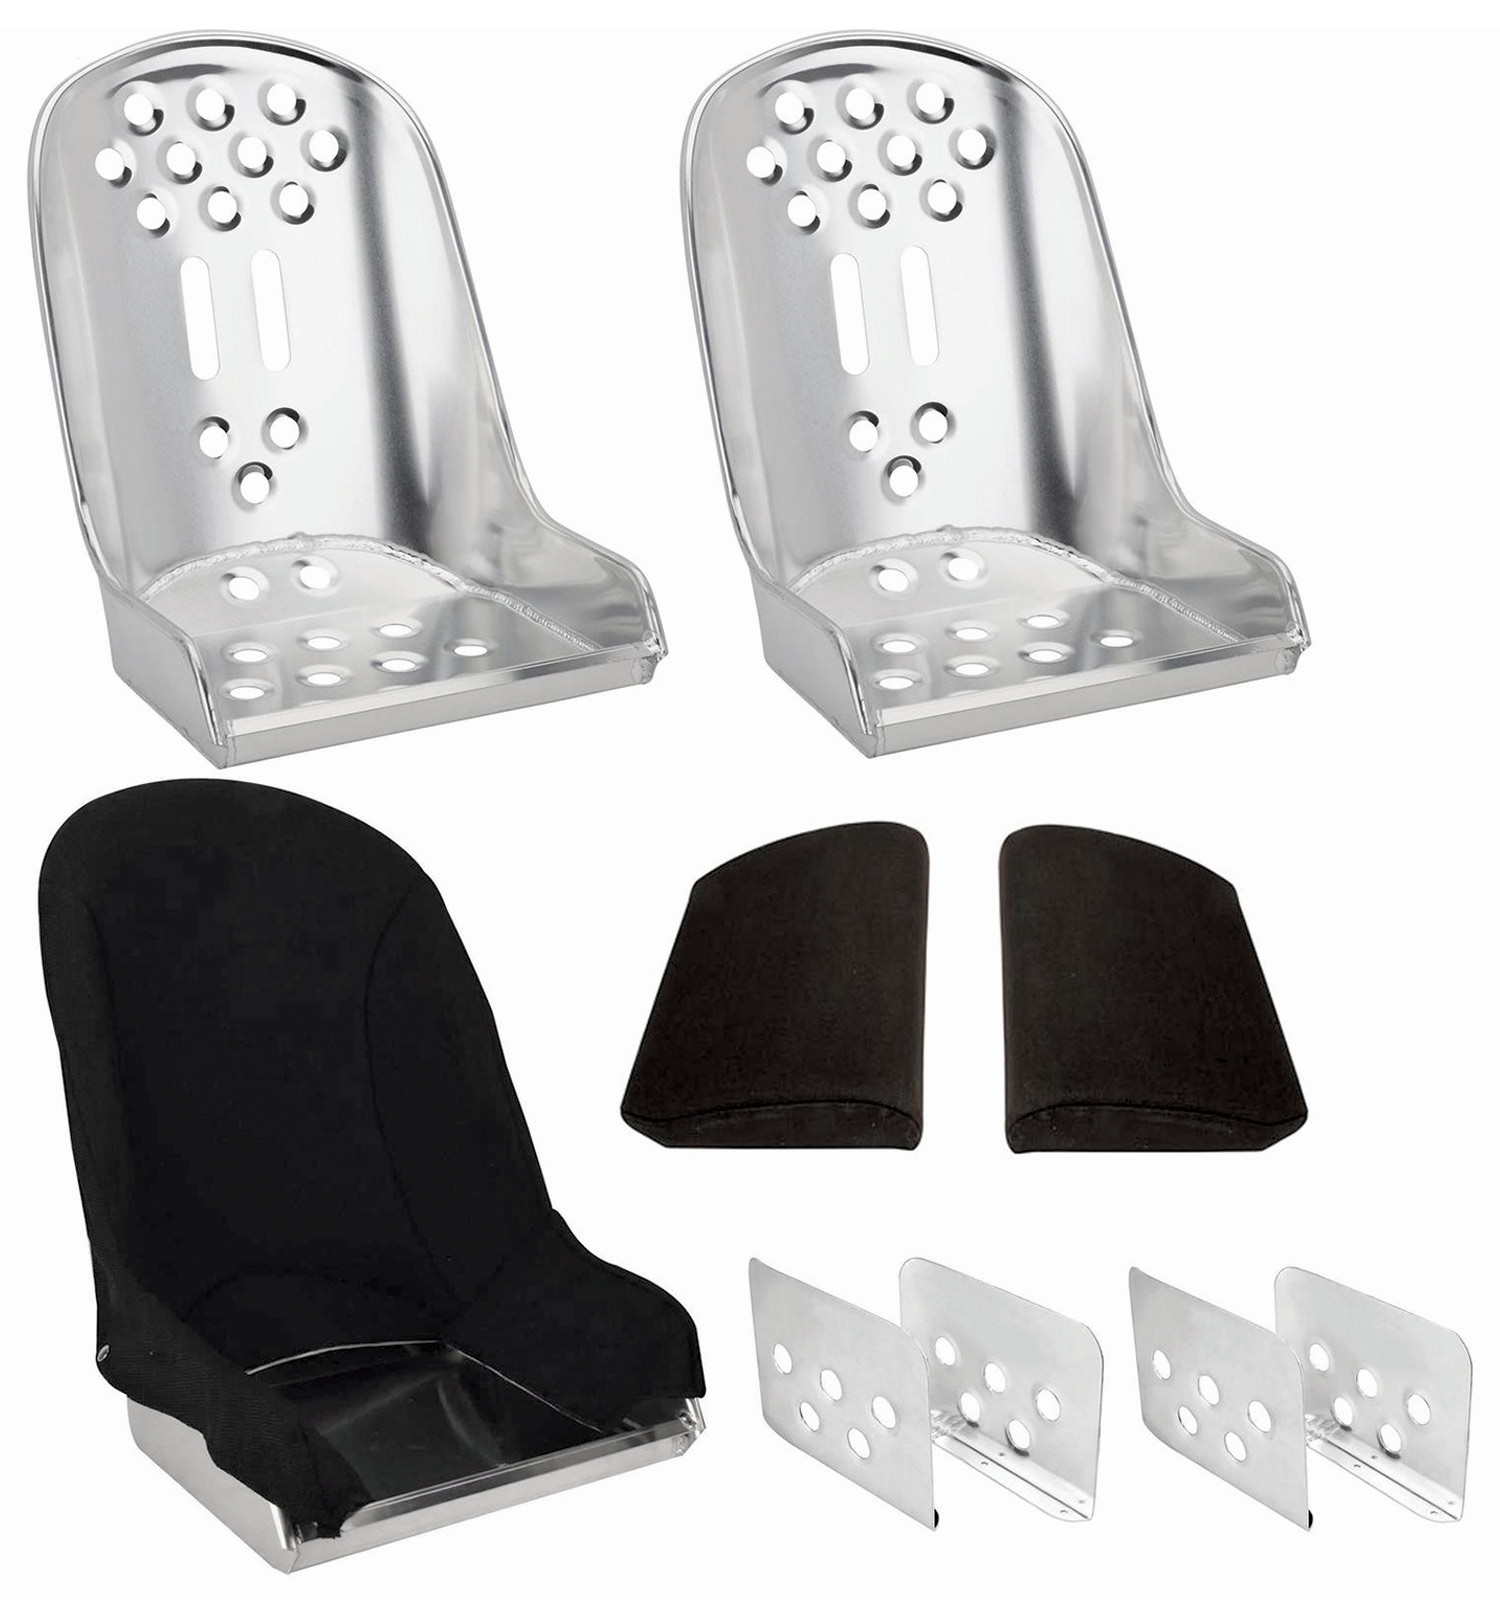 Lightened Bomber Seat with pad and cover plus mounting brackets